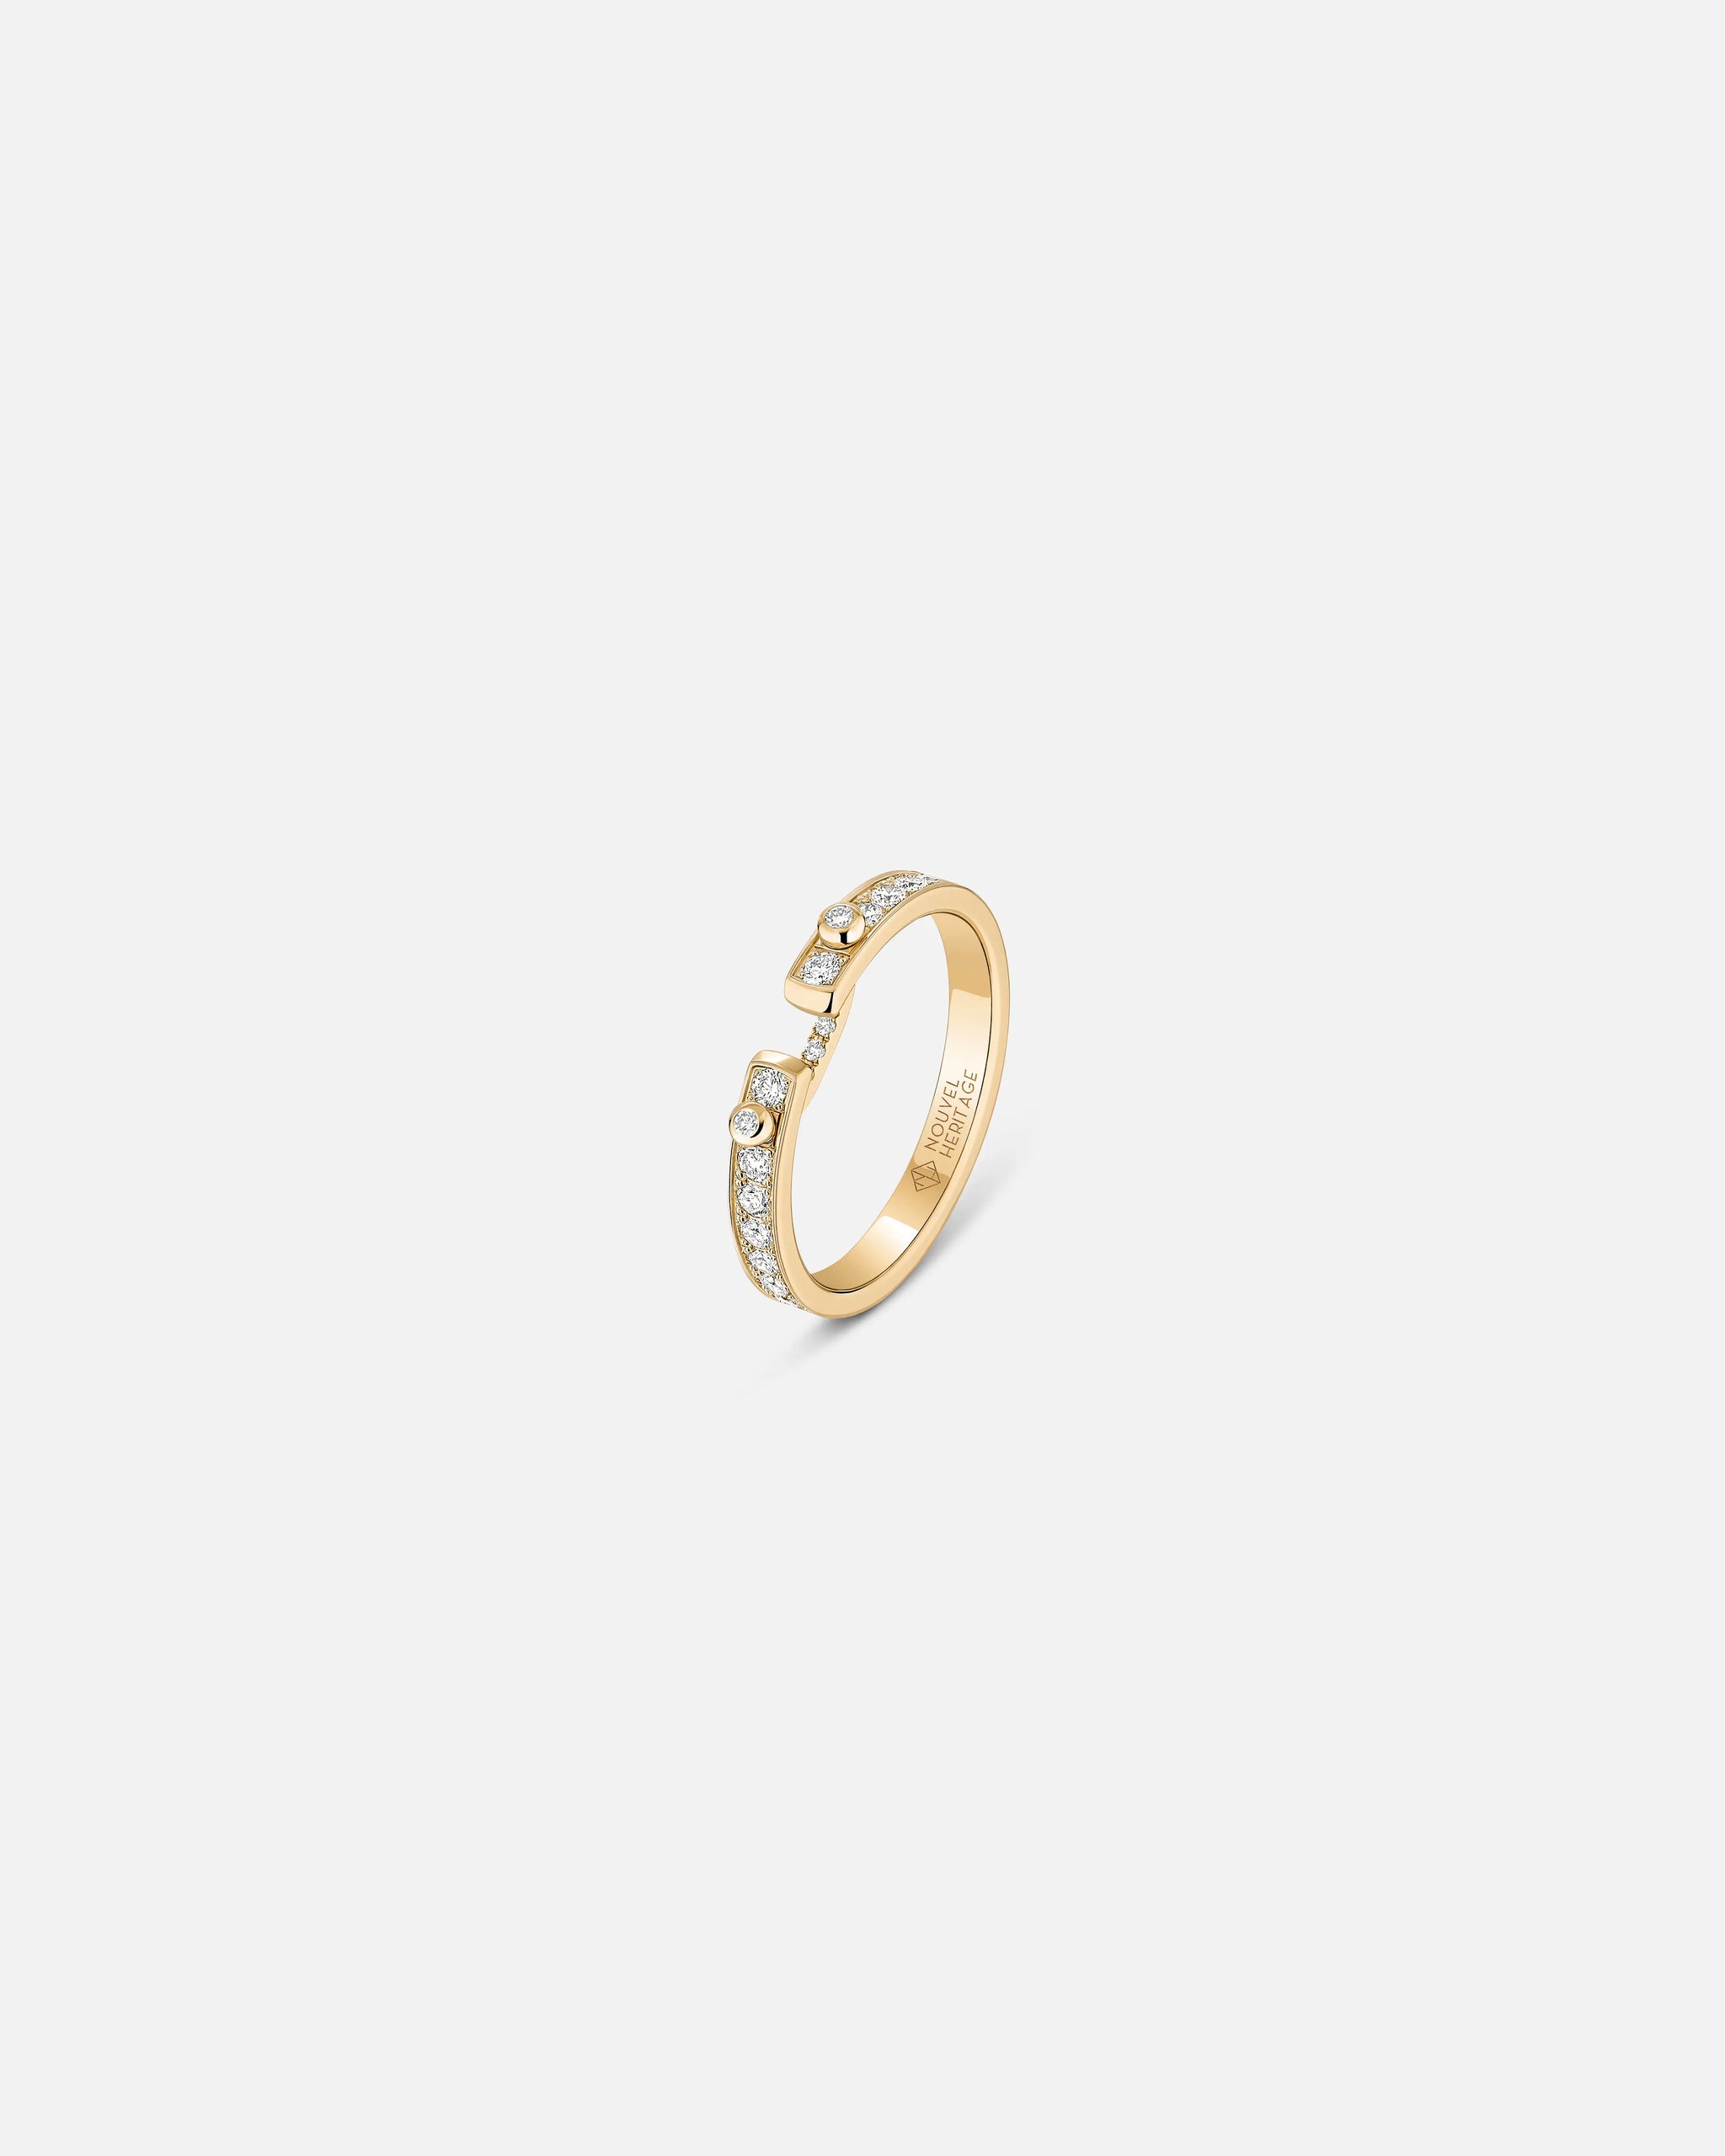 Eternity Tuxedo PM Mood Ring in Yellow Gold - 1 - Nouvel Heritage